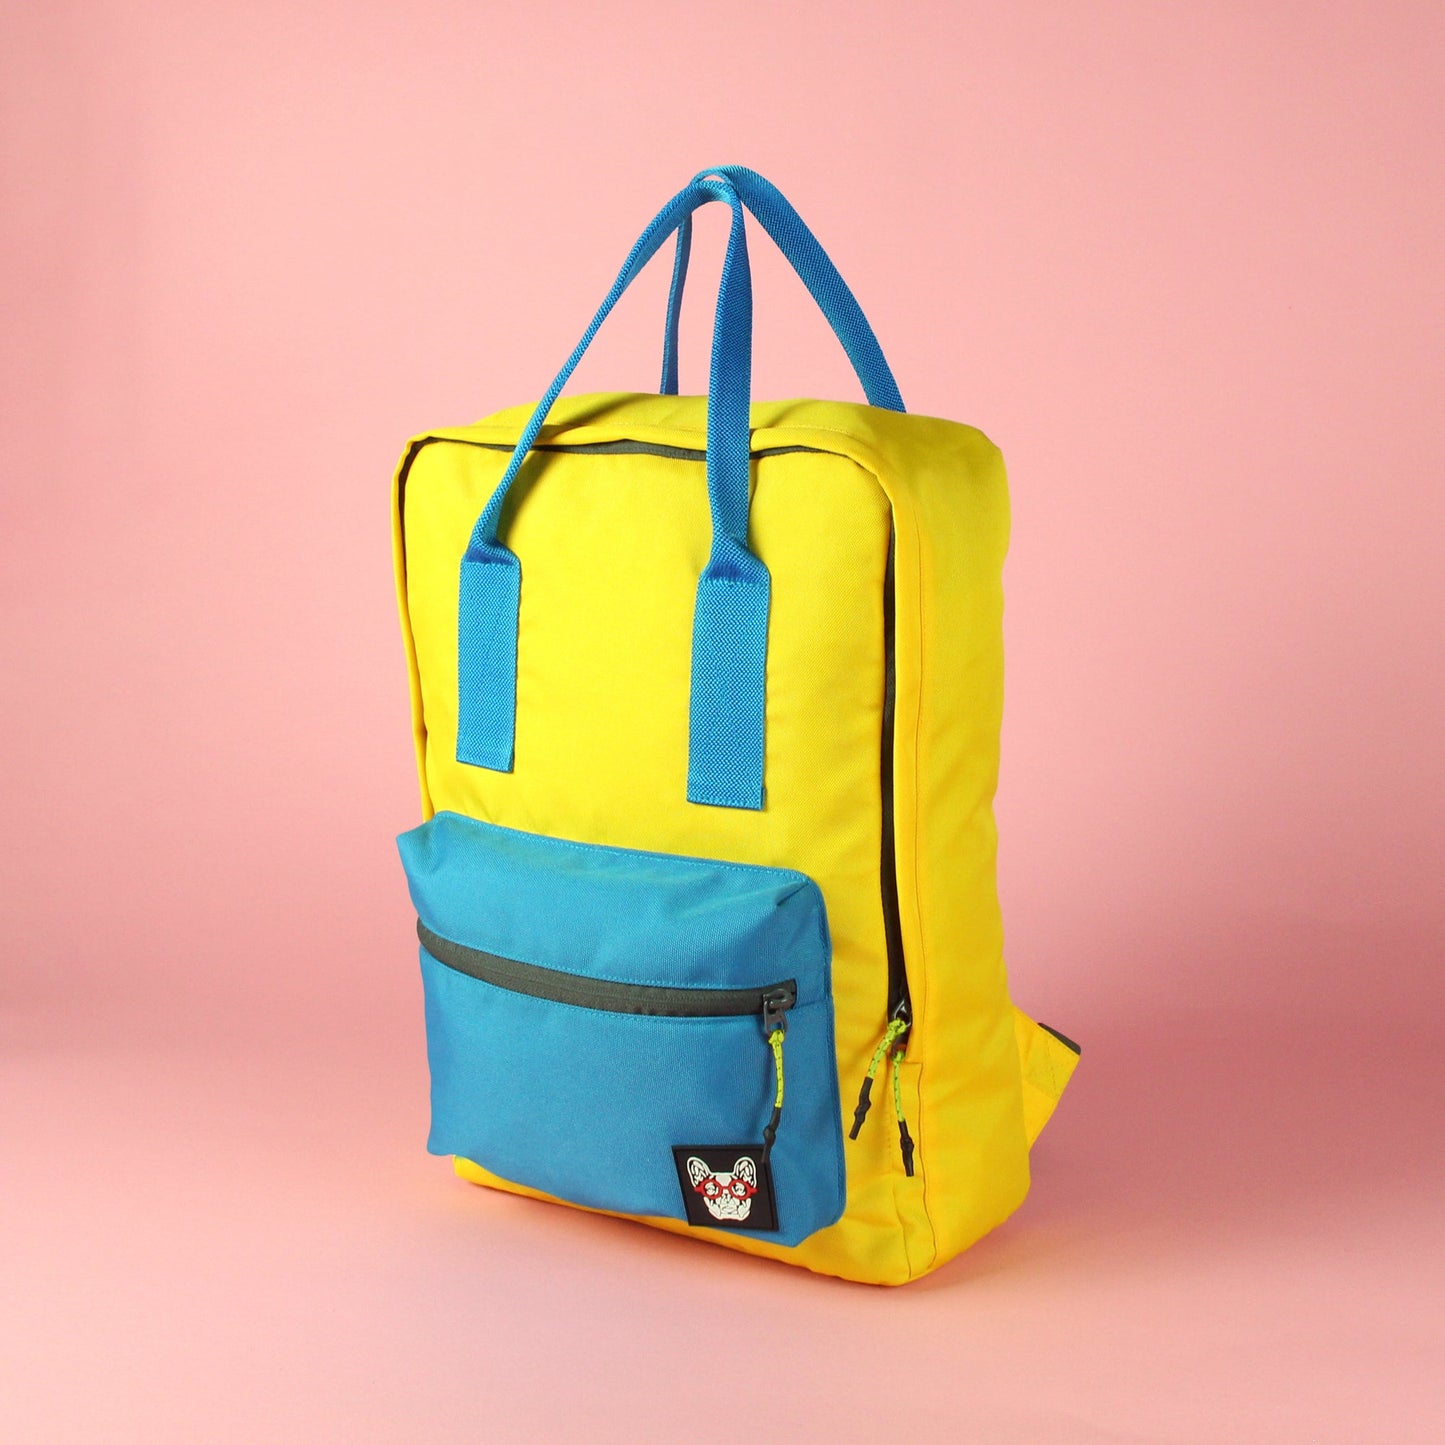 Travelling & Hiking Classic Small Backpack MAD-PACK BUTTERCUP from MADBRAG